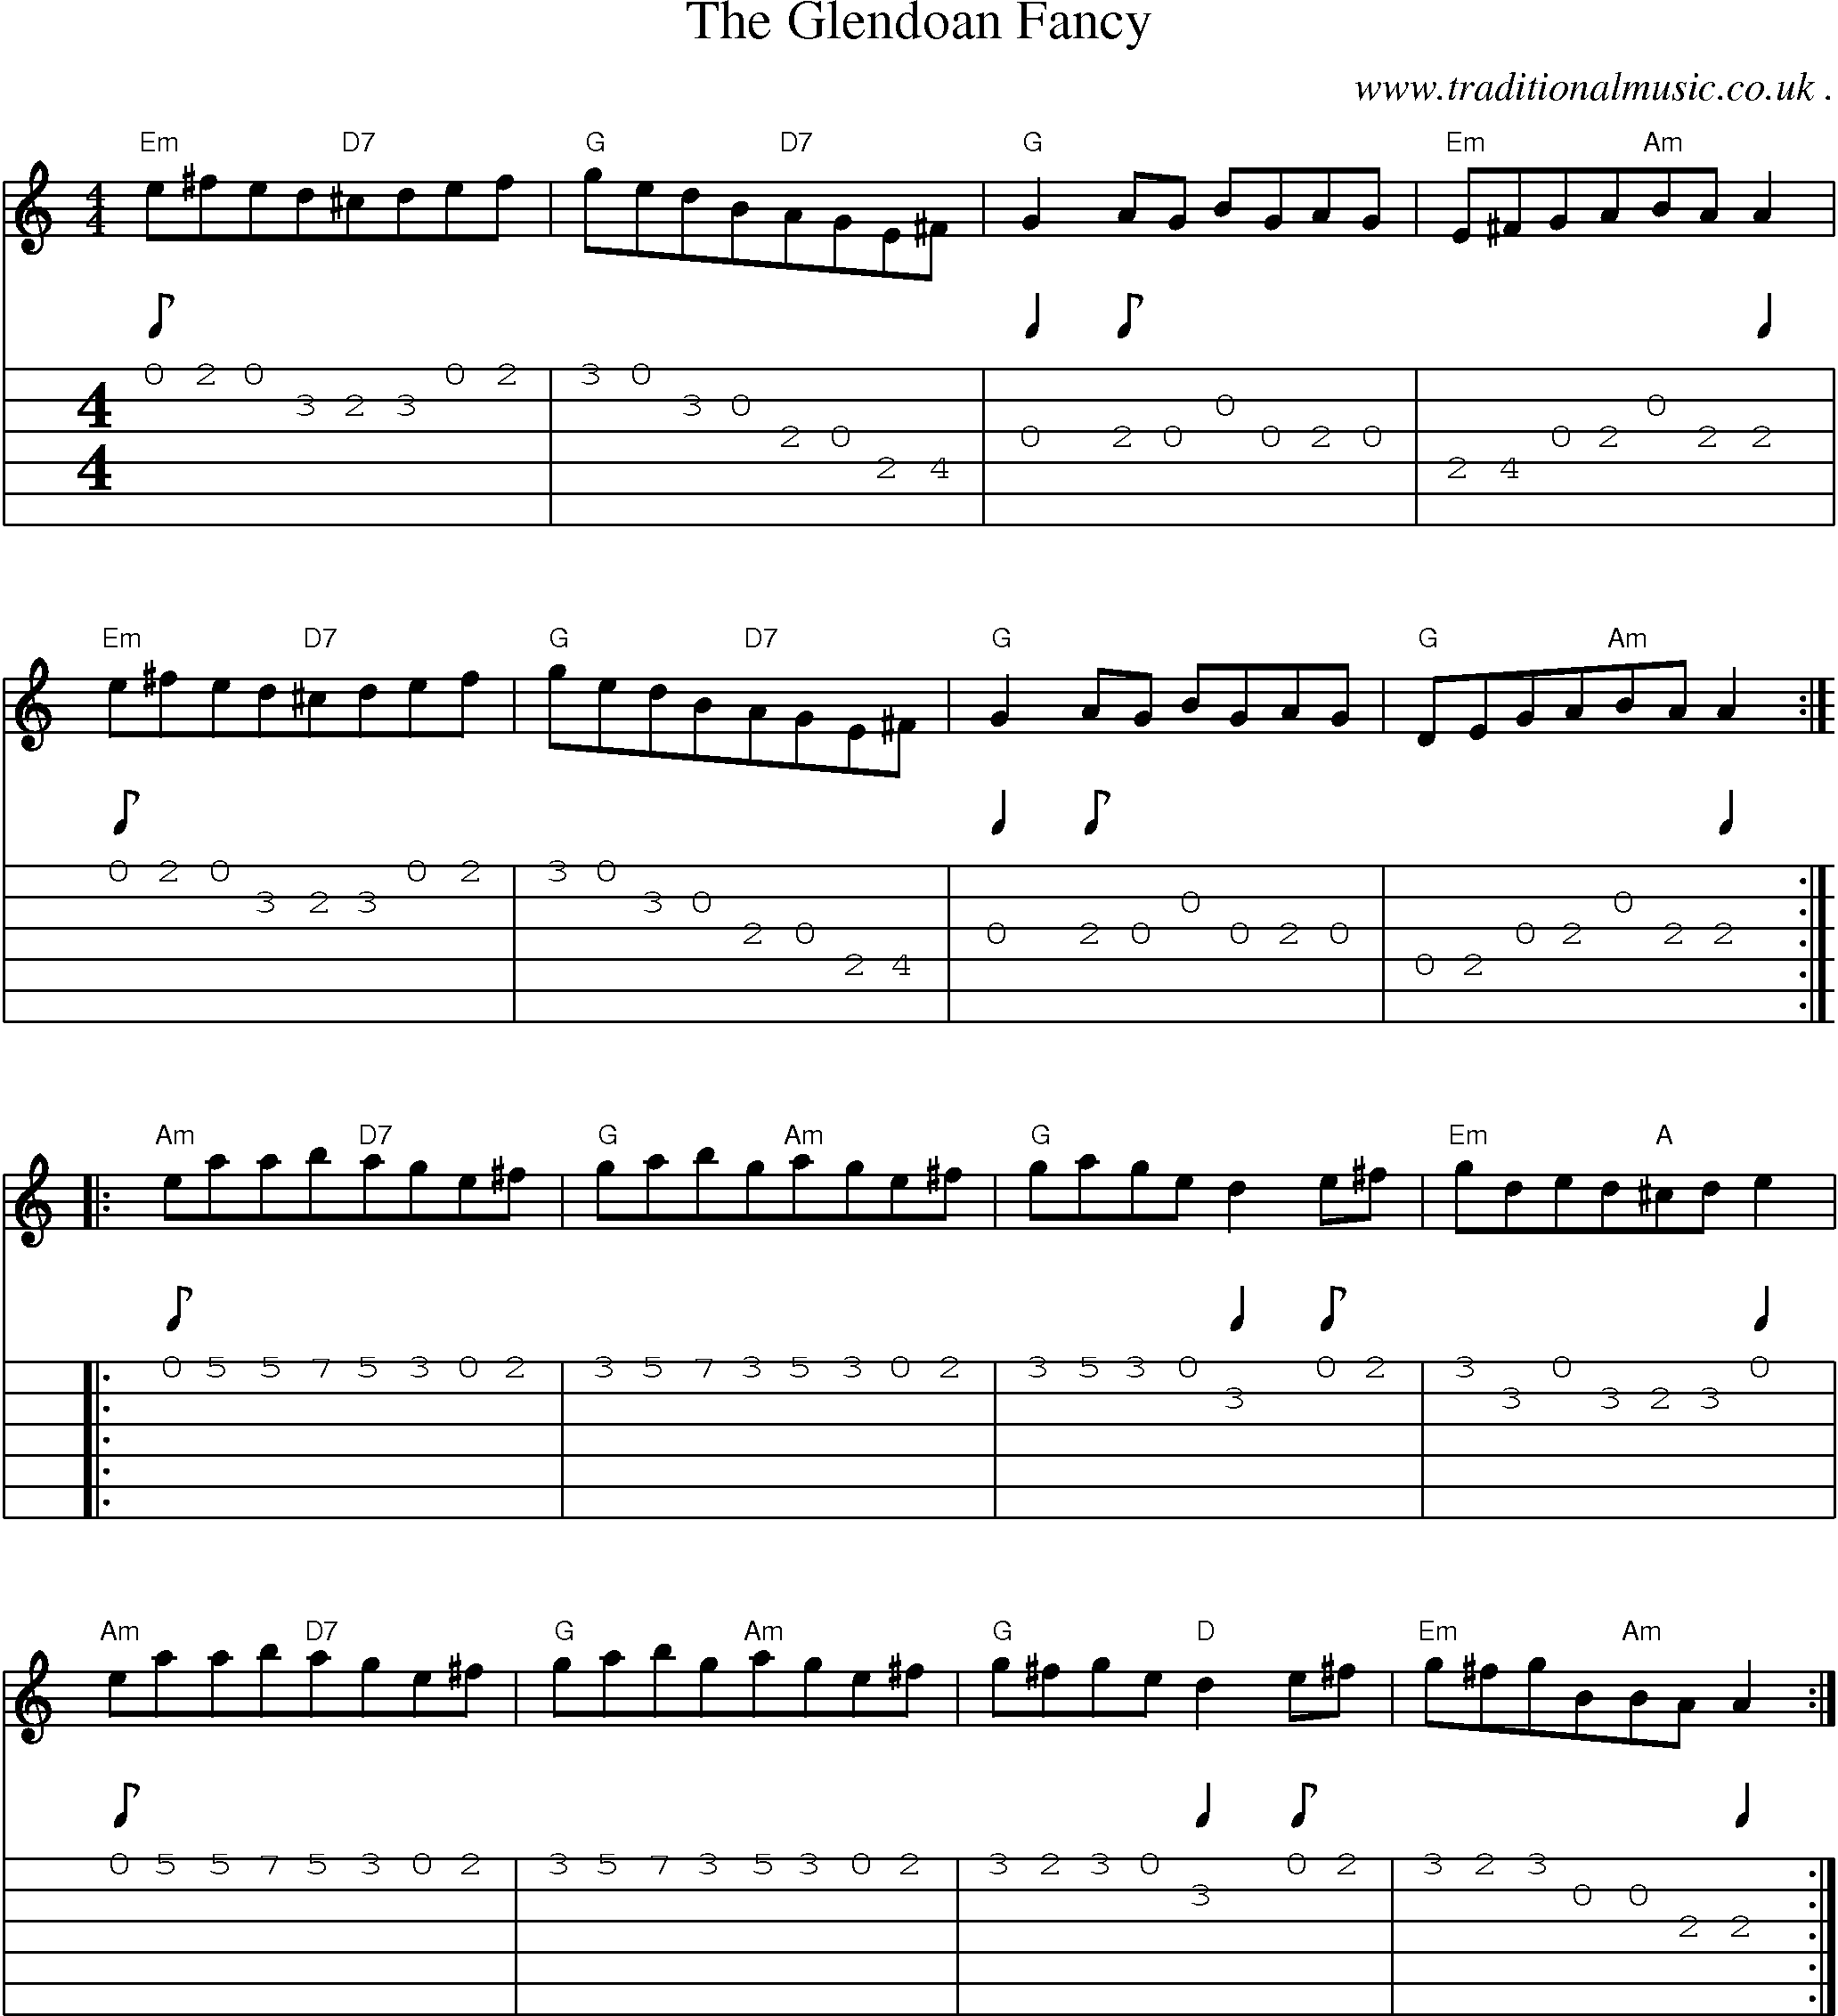 Sheet-Music and Guitar Tabs for The Glendoan Fancy